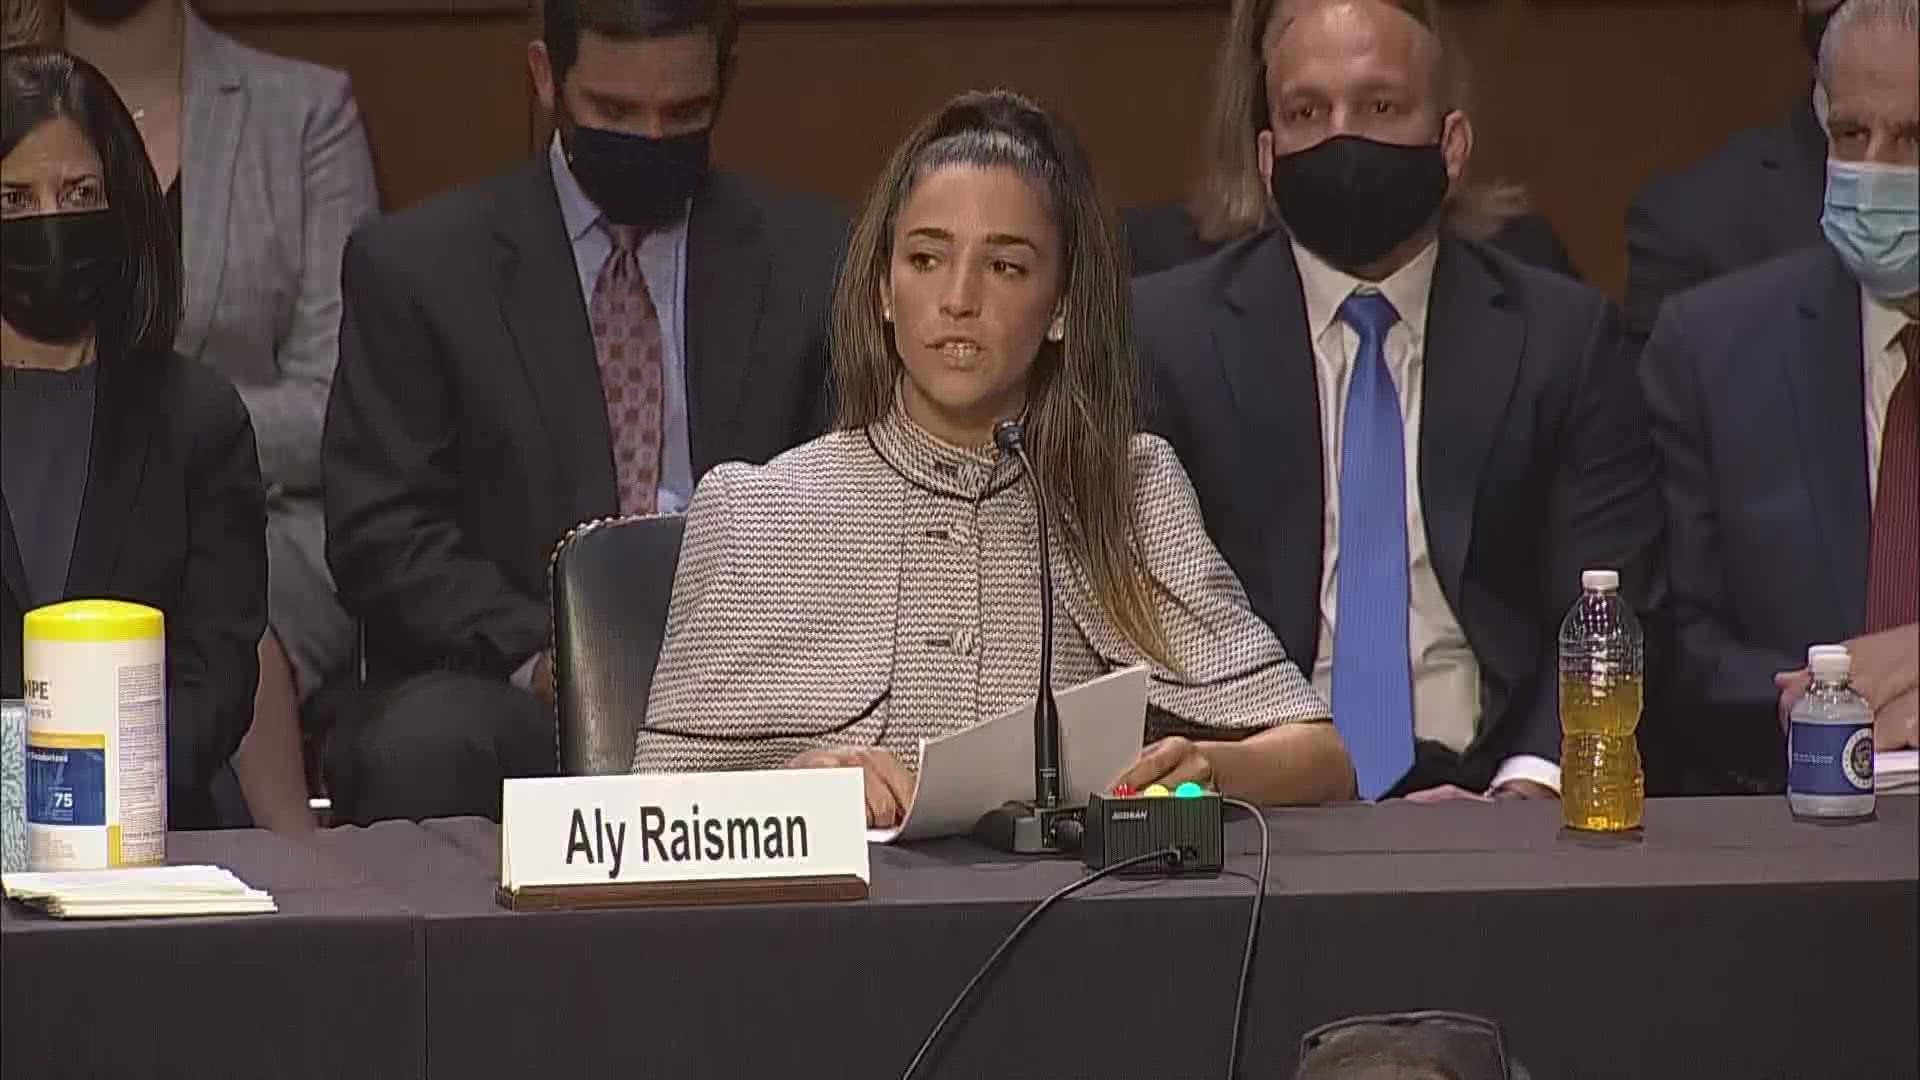 Raisman said it “disgusts me” that they are still looking for answers six years after the original sexual allegations against Nassar were reported.